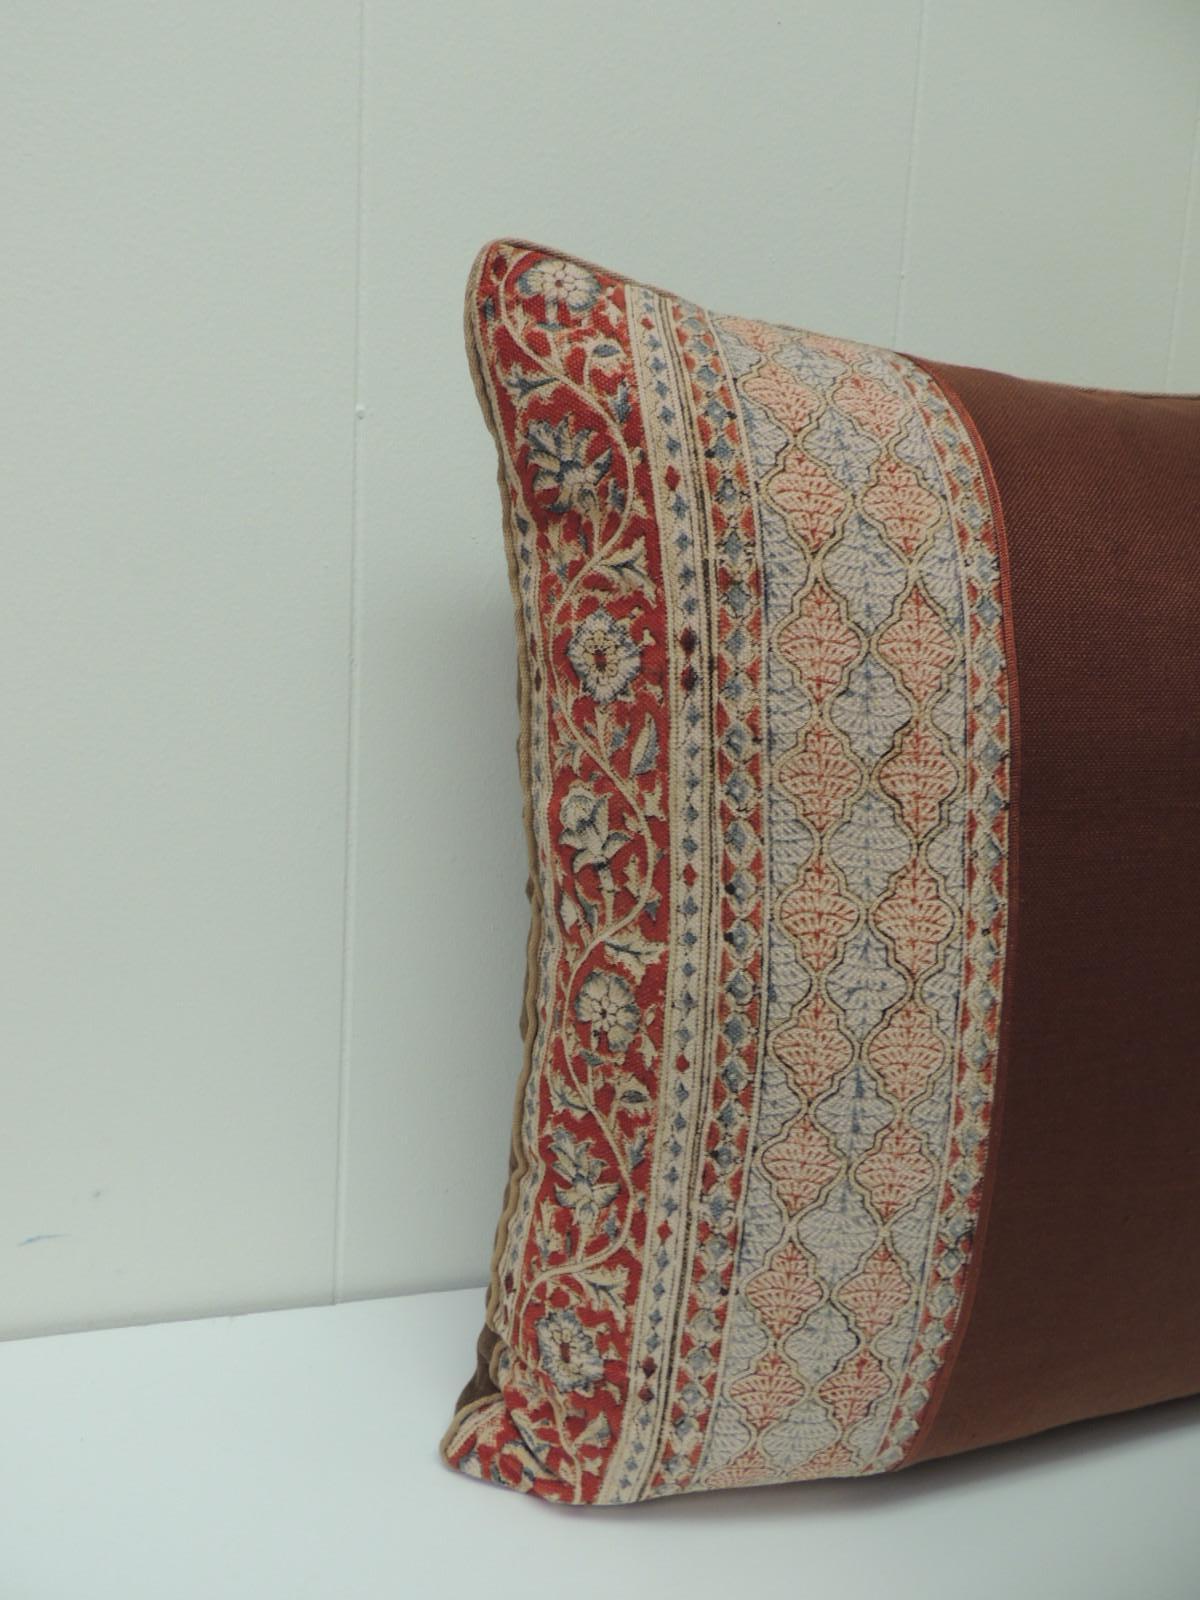 Indian hand-blocked textile decorative pillow. Hand-blocked border at the bottom of the Kalamkari decorative pillow framed with rust-colored textured linen and embellished with a rust color cord at the seams. Small tan cotton piping all around and